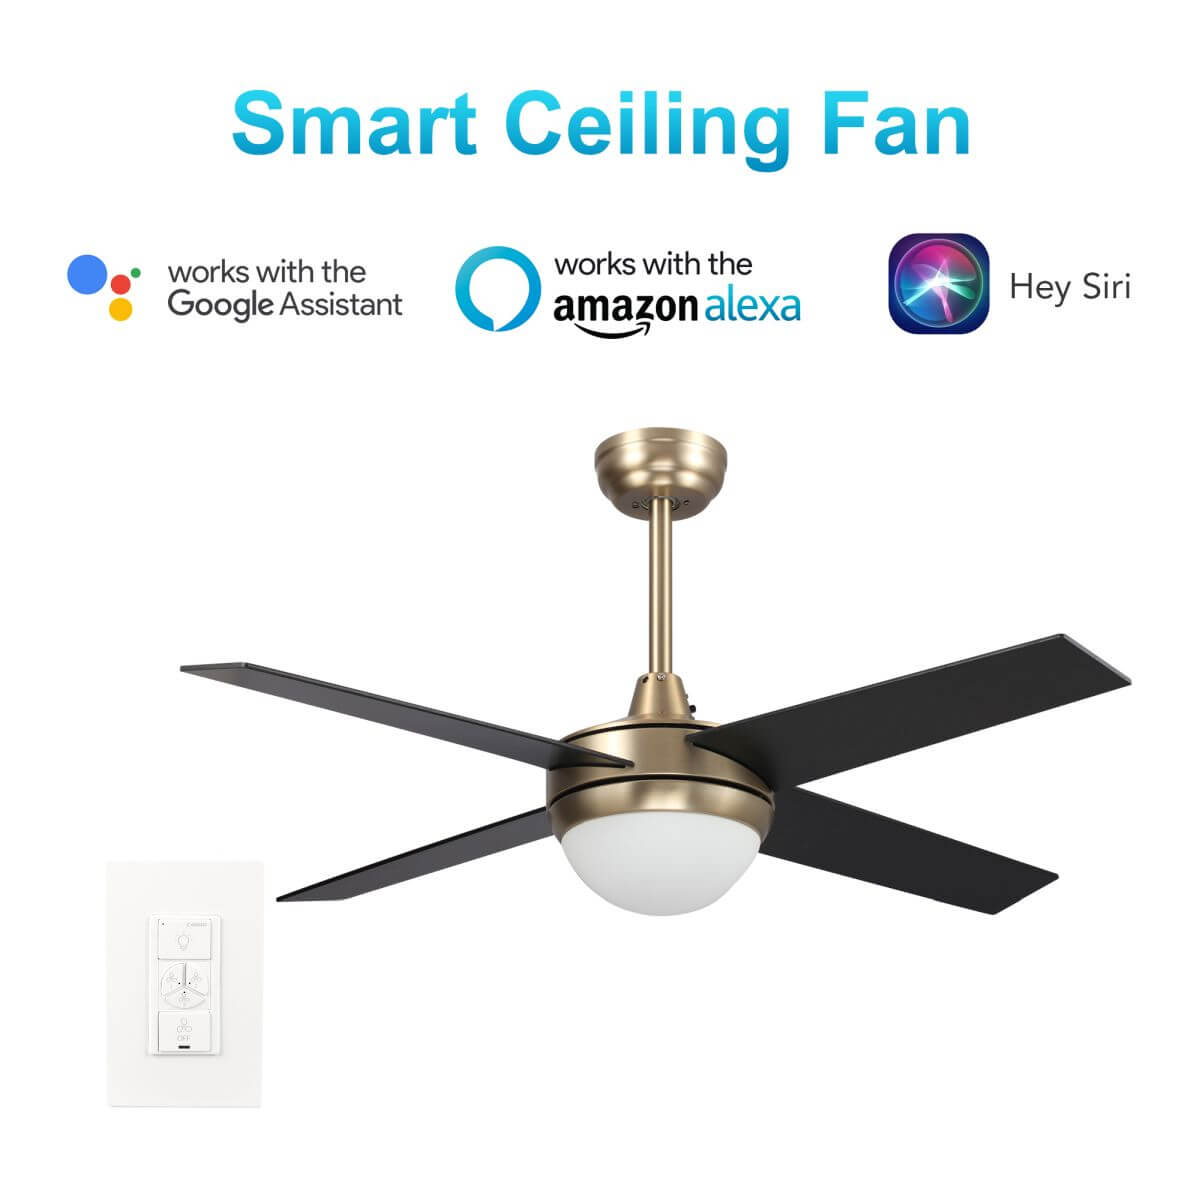 Nova 48" In. 4 Blade Smart Ceiling Fan with LED Light Kit Works with Wall control, Wi-Fi apps and Voice control via Google Assistant/Alexa/Siri